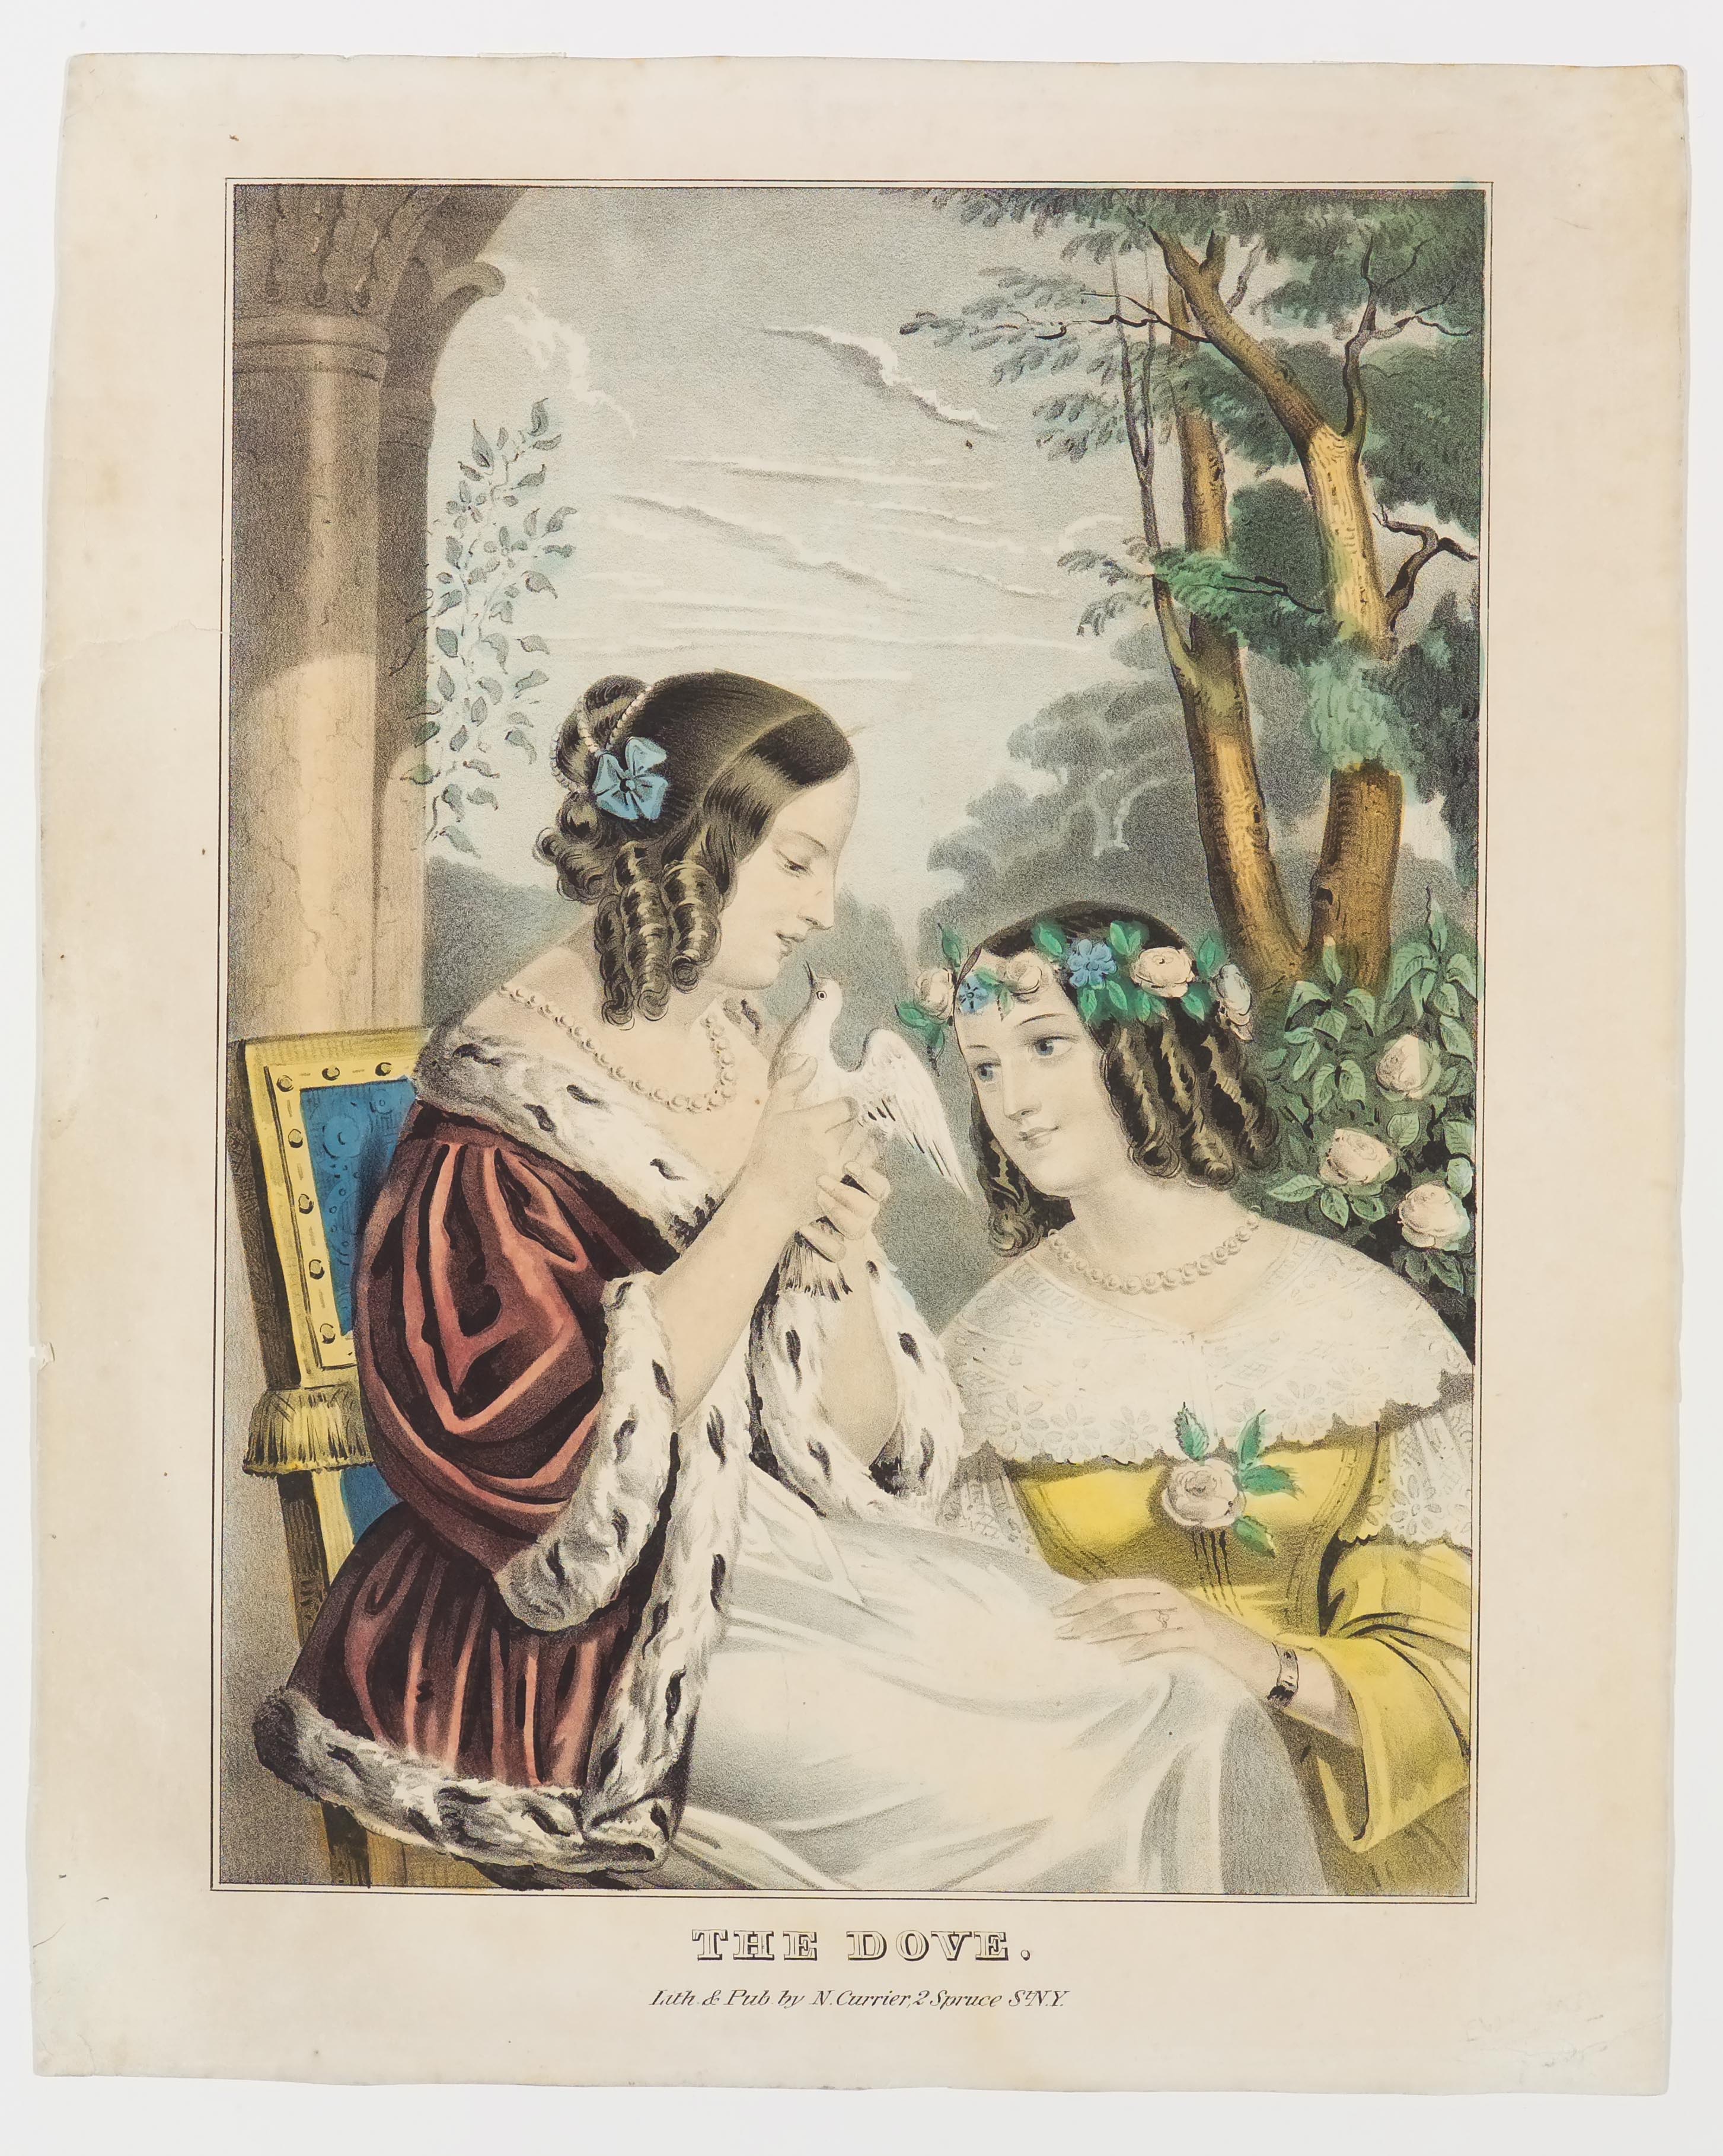 Two women - one on left seated holding and looking down at dove; one on right in yellow dress and kneeling and looking up at dove